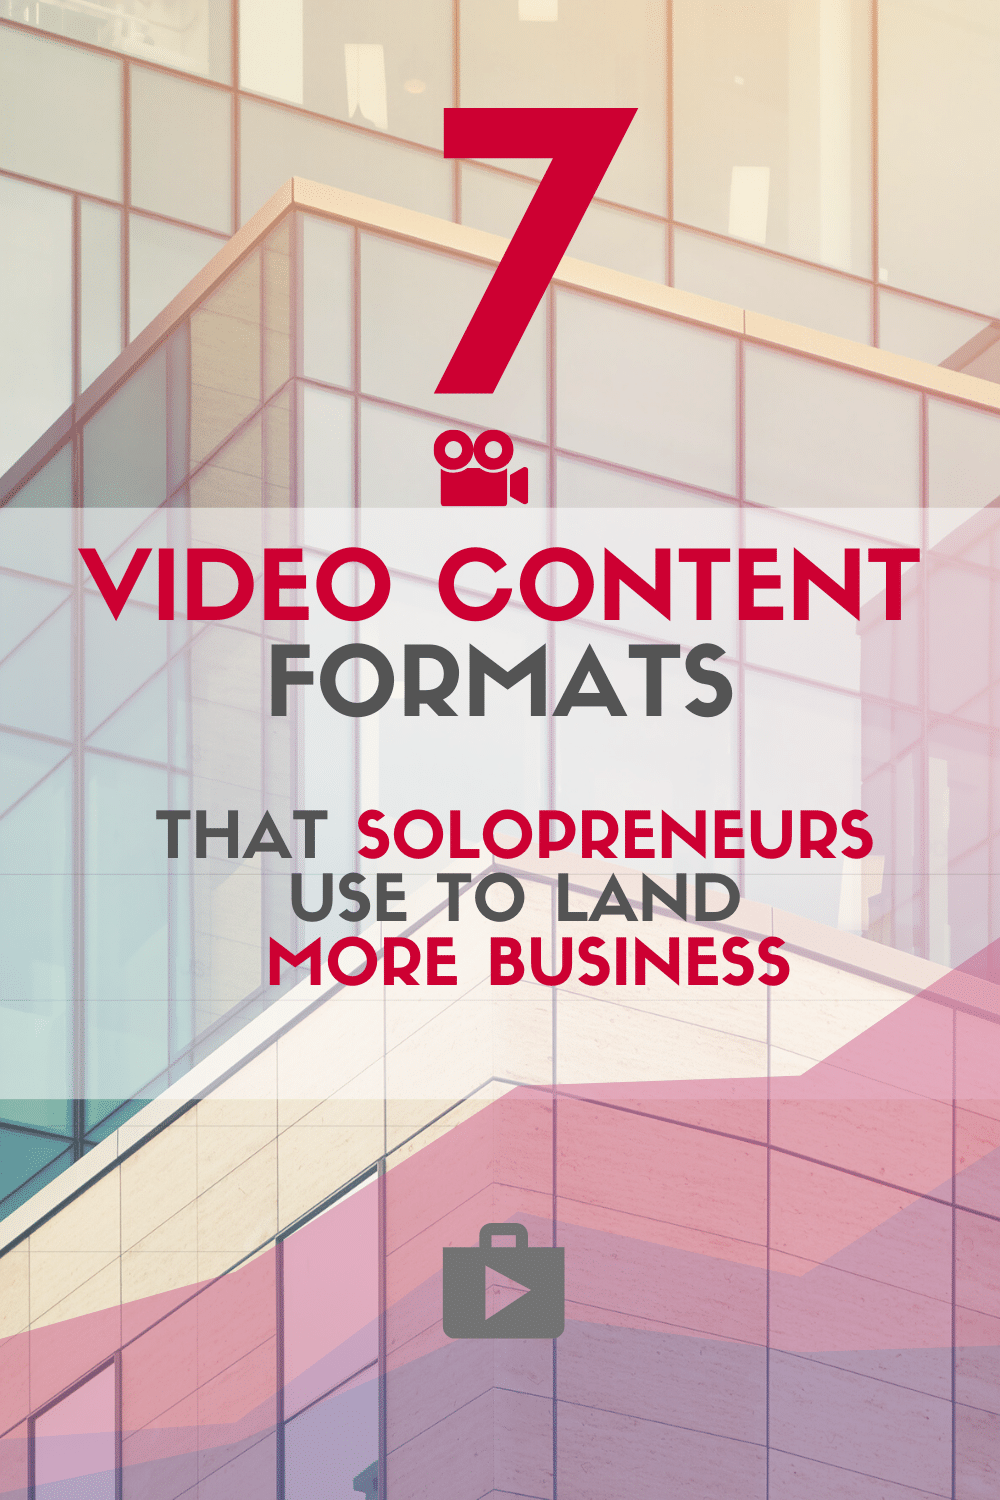 7 Video Content Formats That Solopreneurs Use to Land More Business